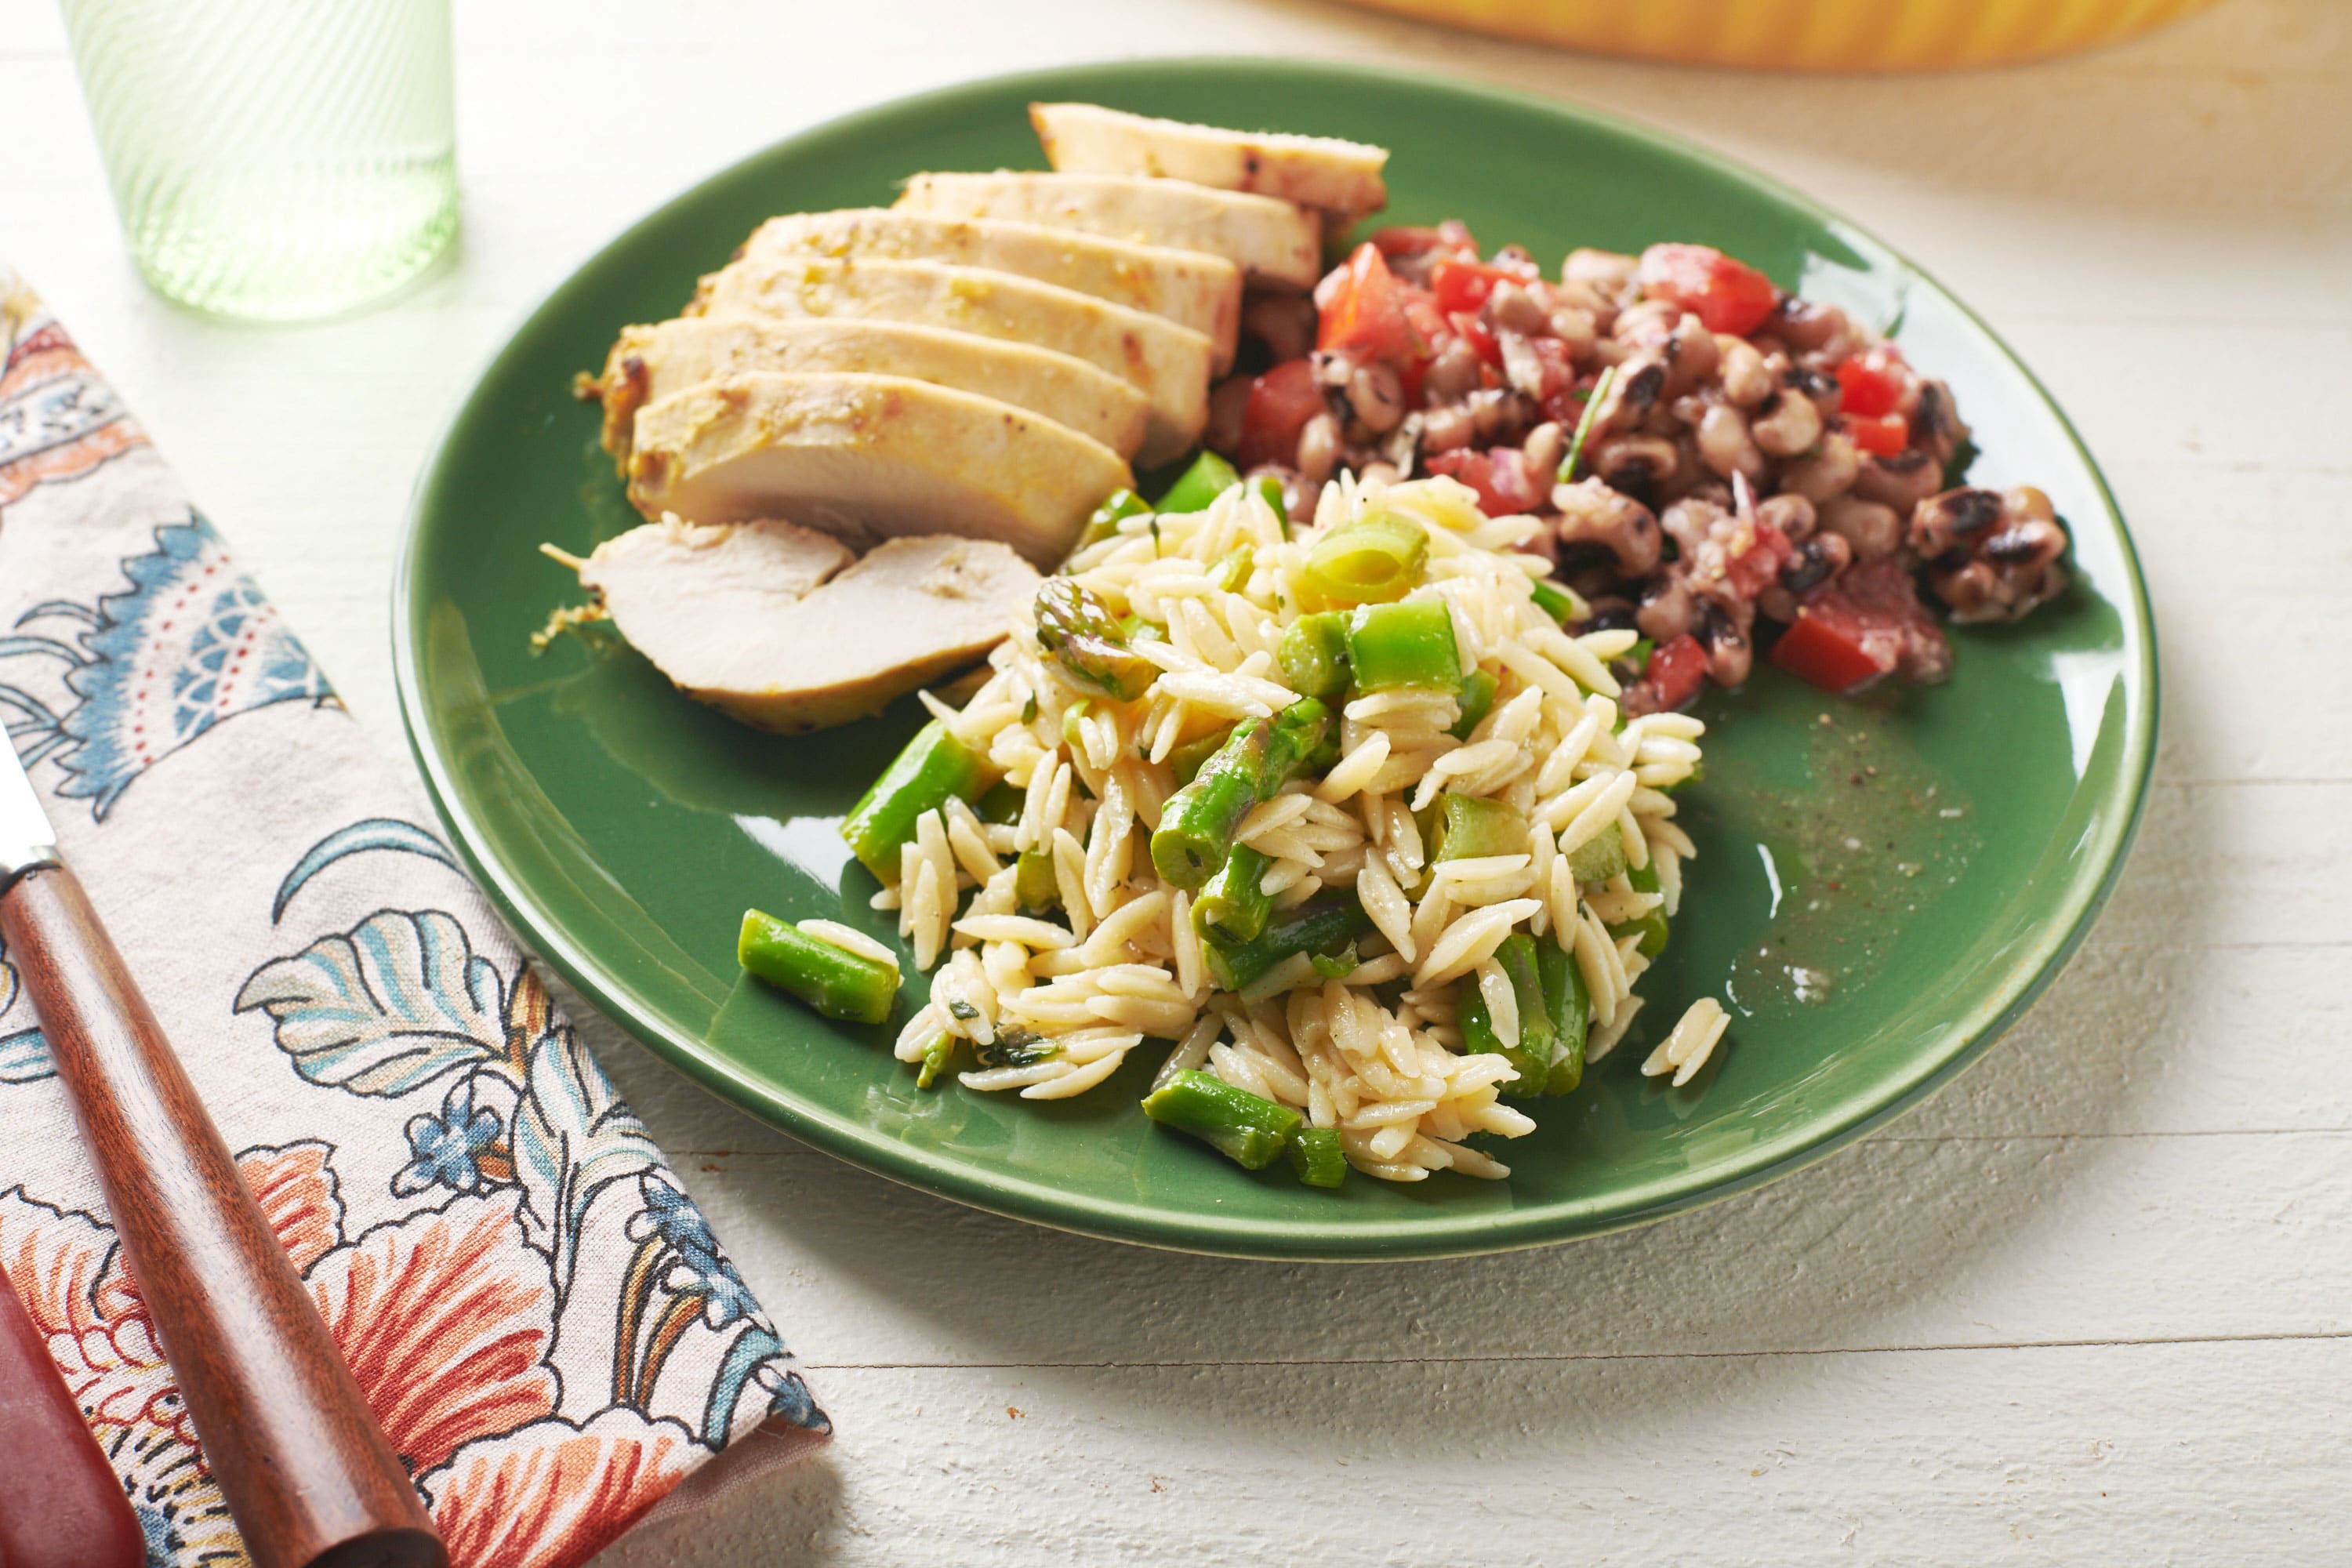 Green plate with Vegetarian Spring Orzo Salad, meat, and beans.